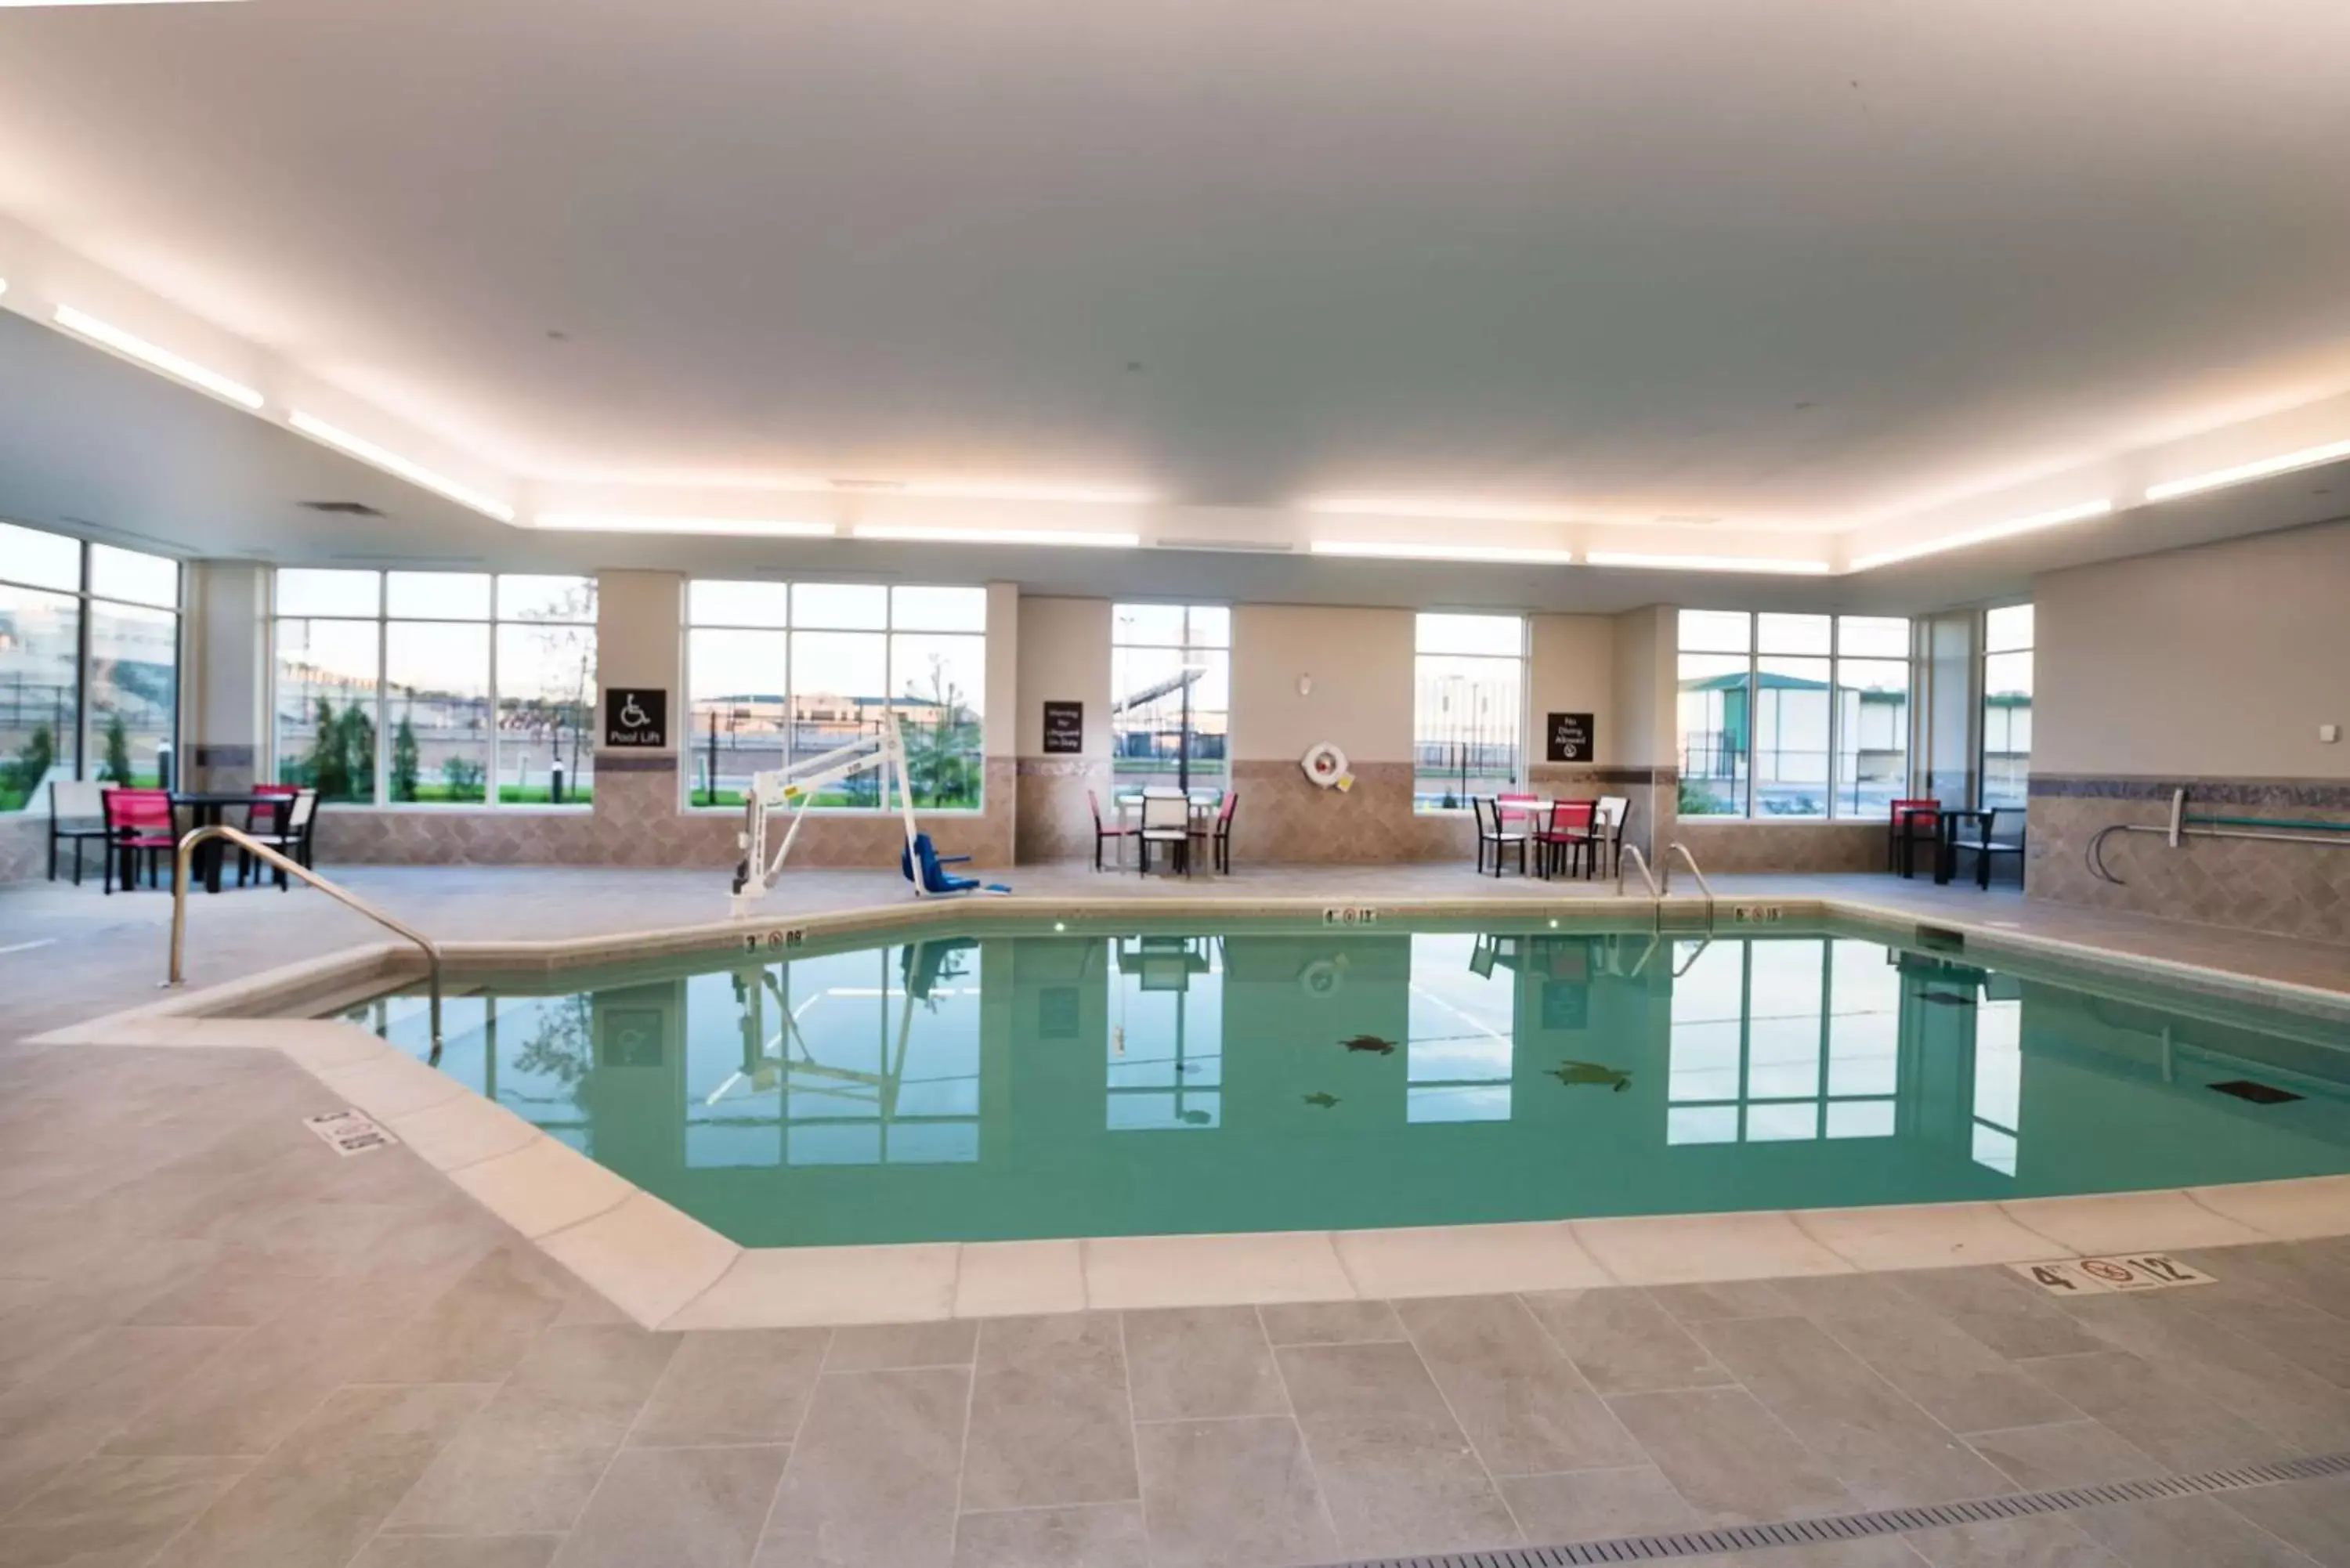 Swimming Pool in Homewood Suites By Hilton Tulsa Catoosa